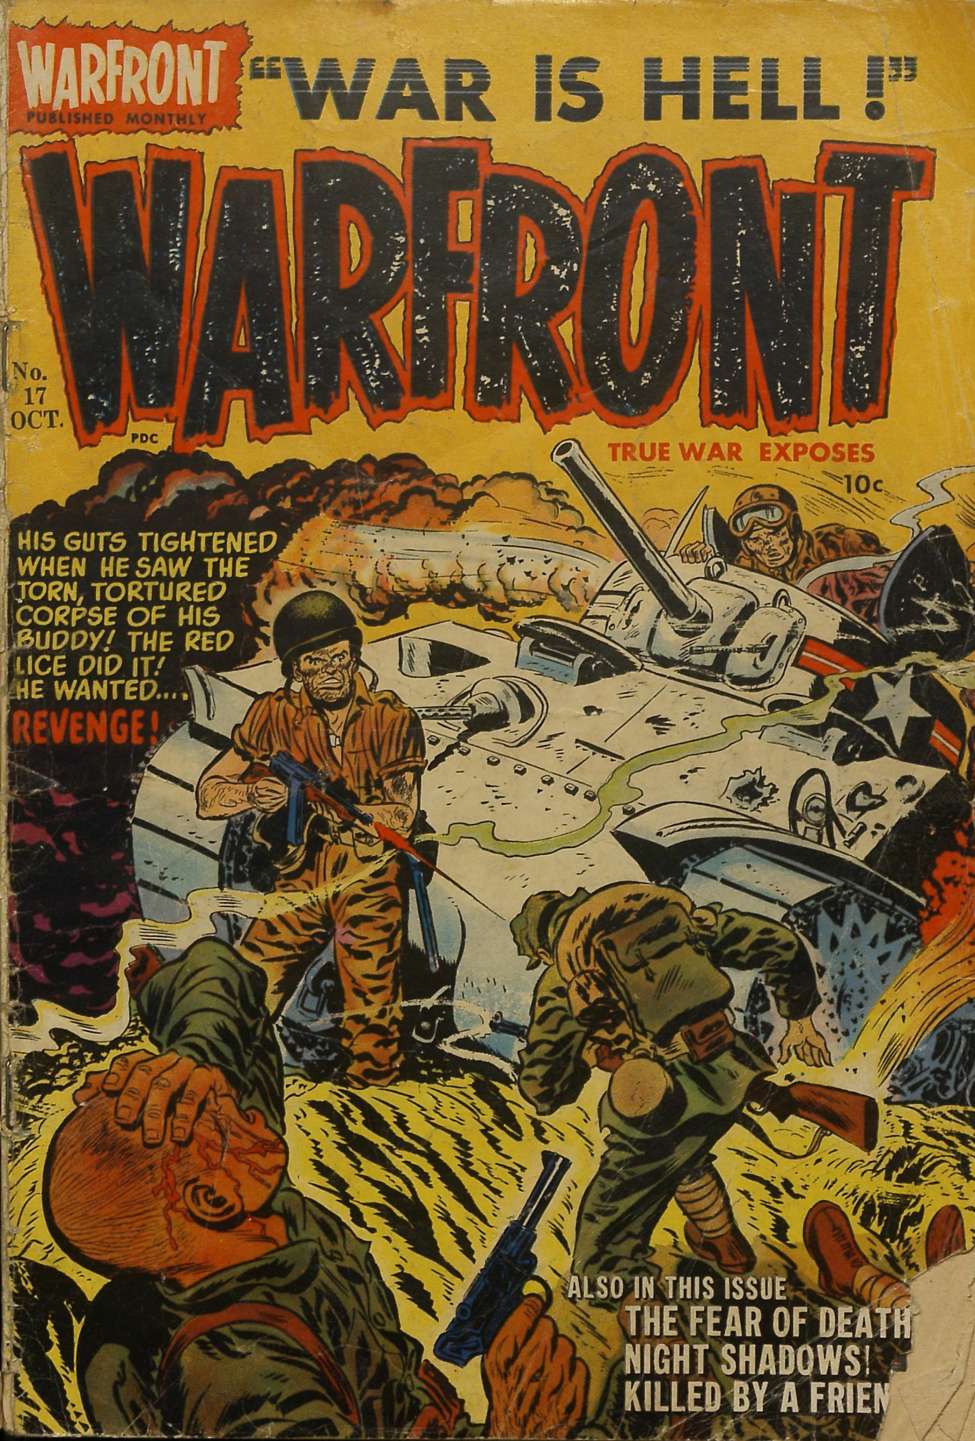 Comic Book Cover For Warfront 17 - Version 2